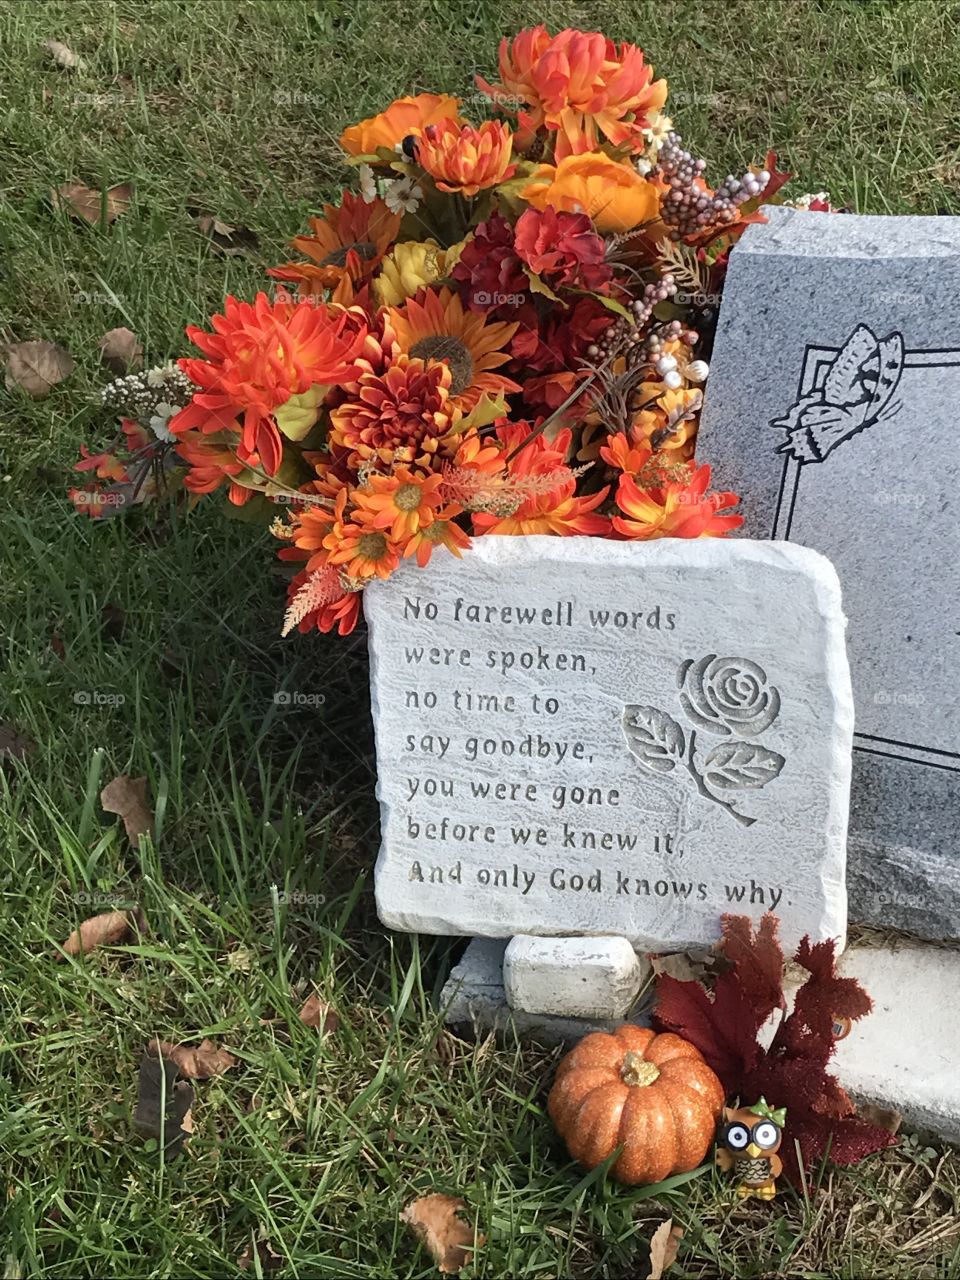 A headstone at a cemetery has been recently visited and decorated for the autumn season.